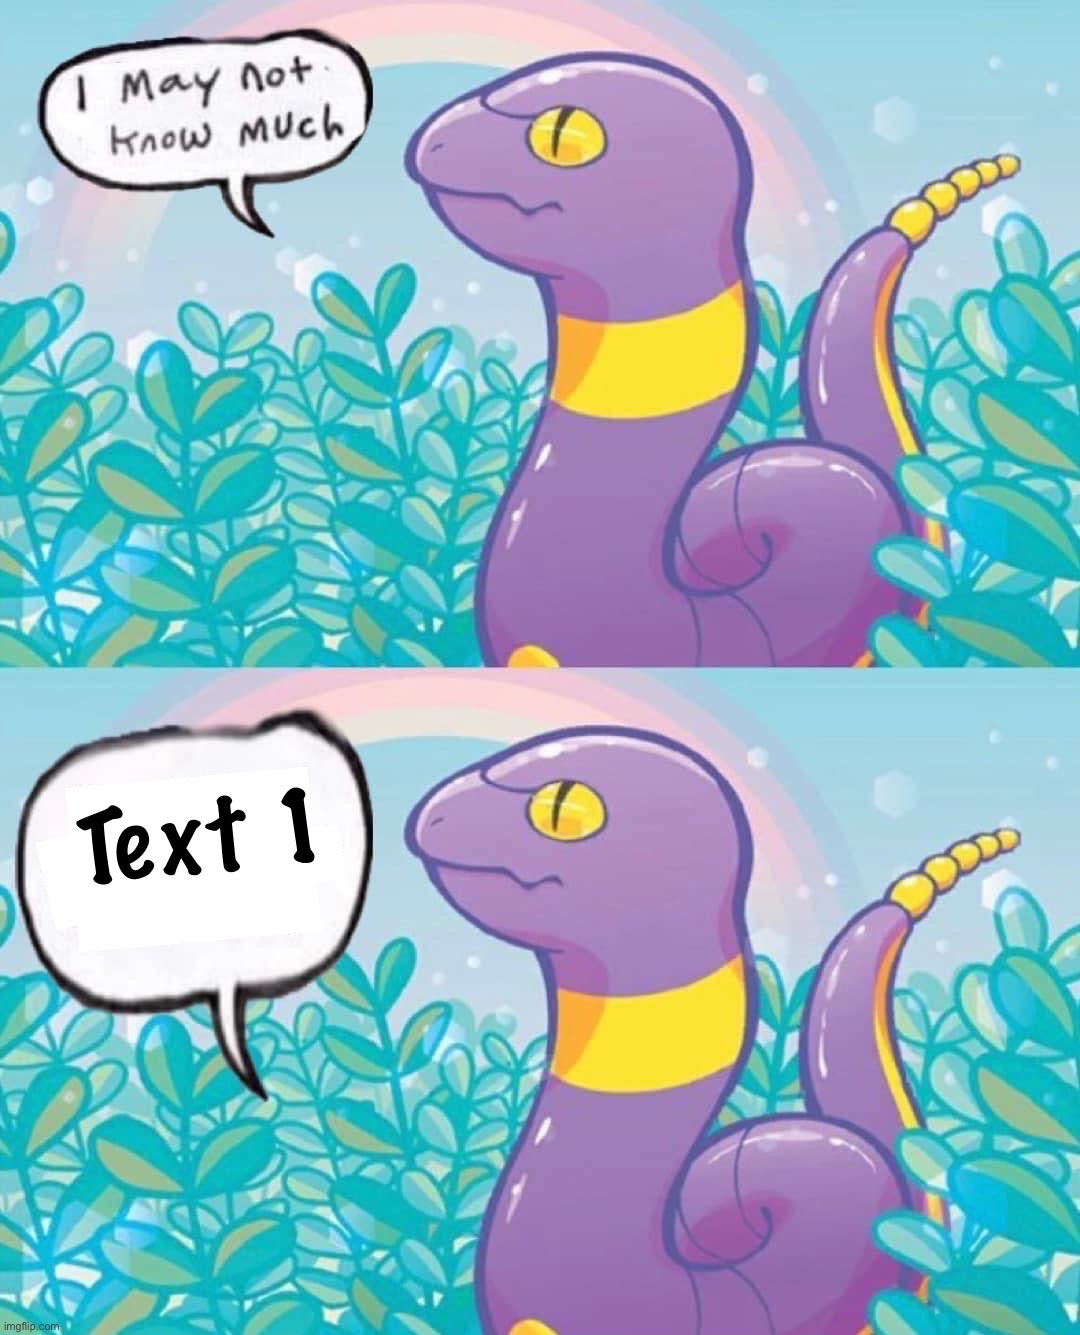 ekans-i-may-not-know-much-imgflip